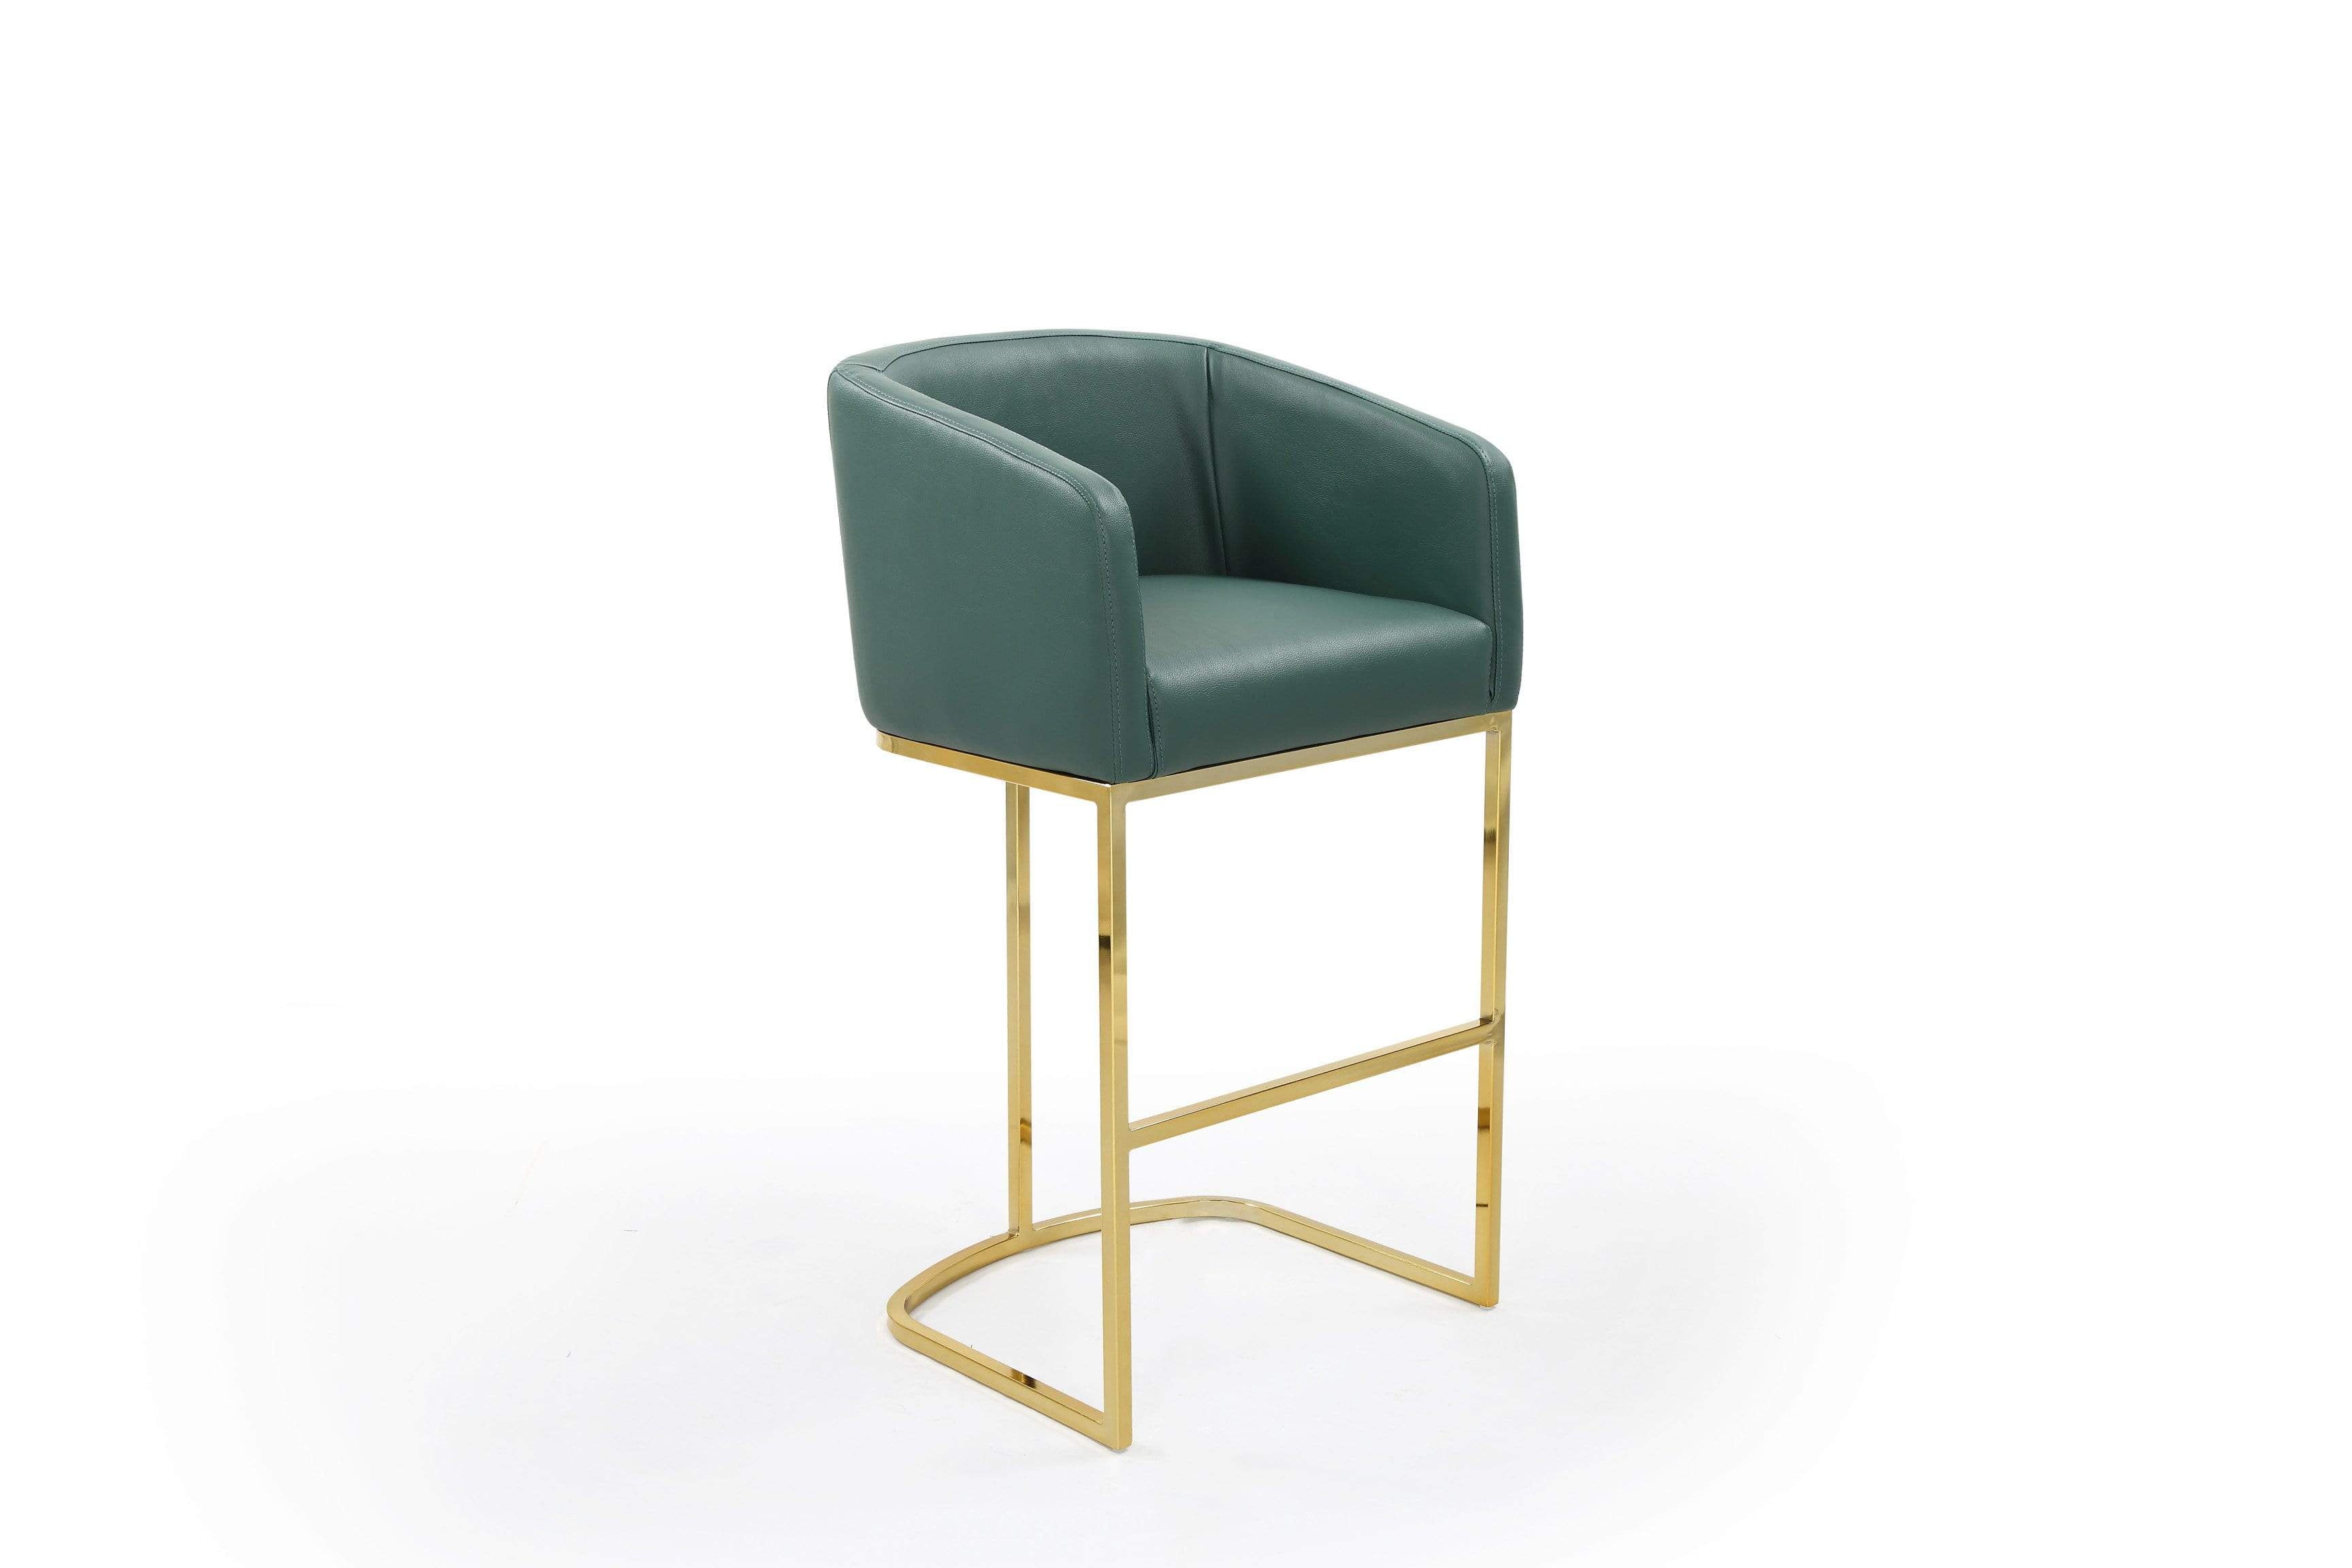 Easly Faux Leather Bar Stool Chair Gold Base